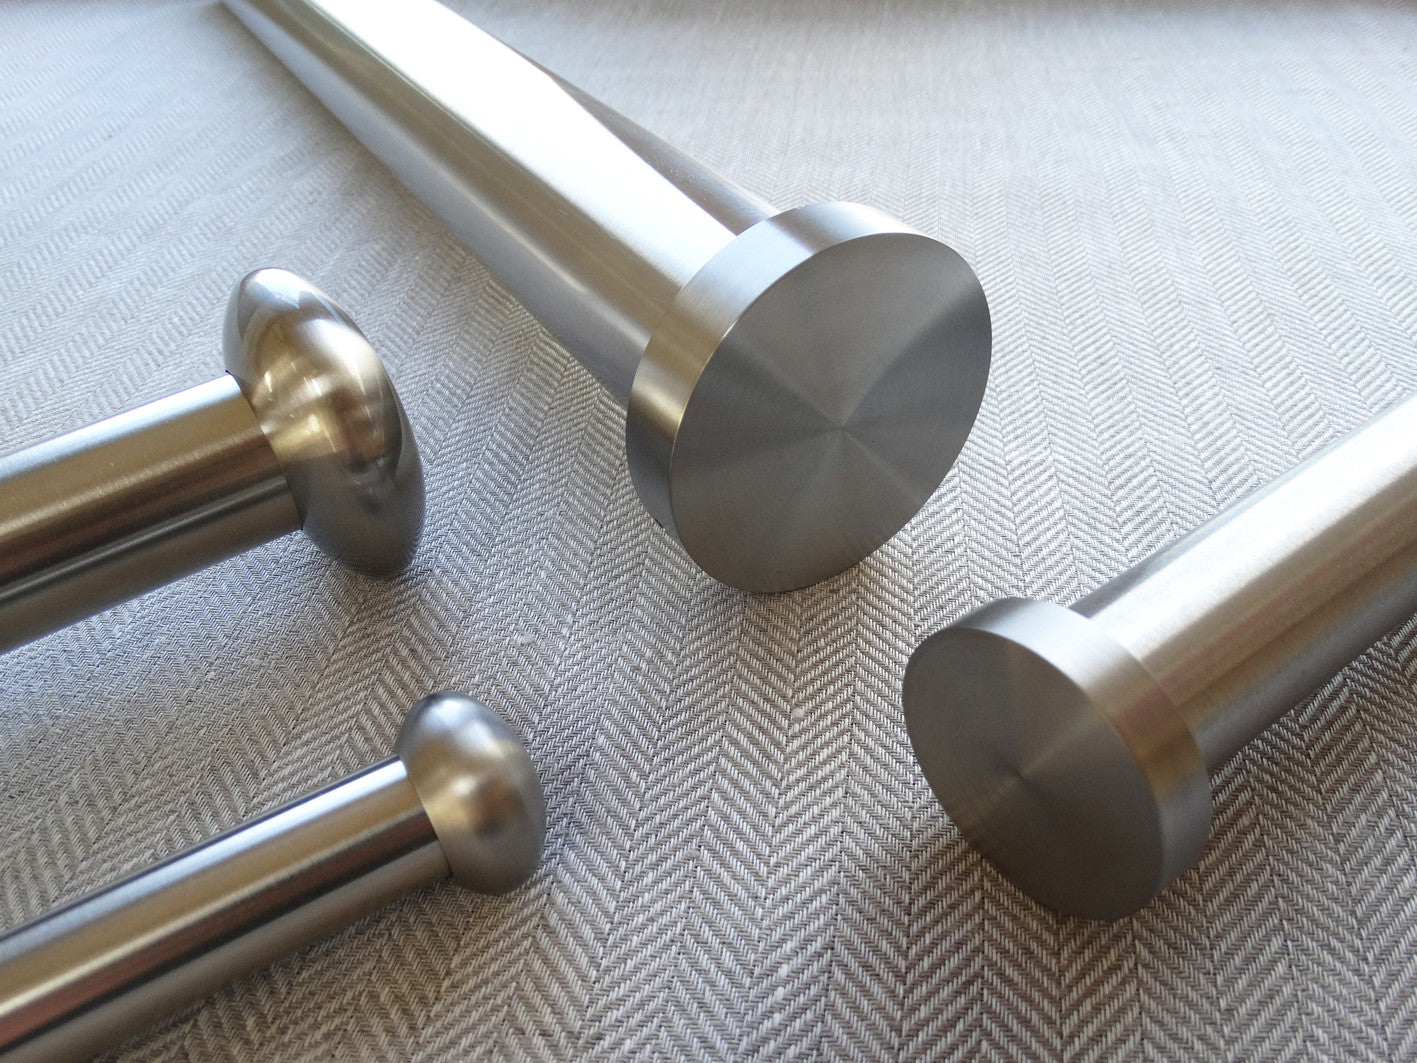 30mm diameter stainless steel curtain pole set collections with plain metal finials